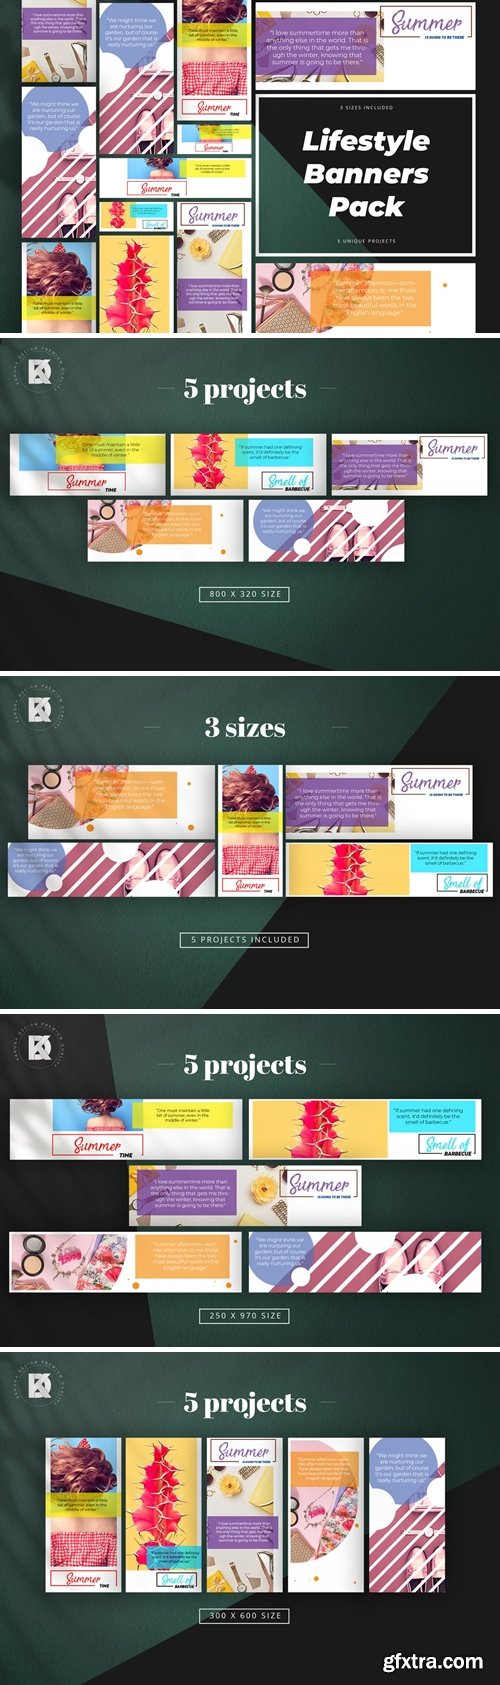 Lifestyle Banner Pack